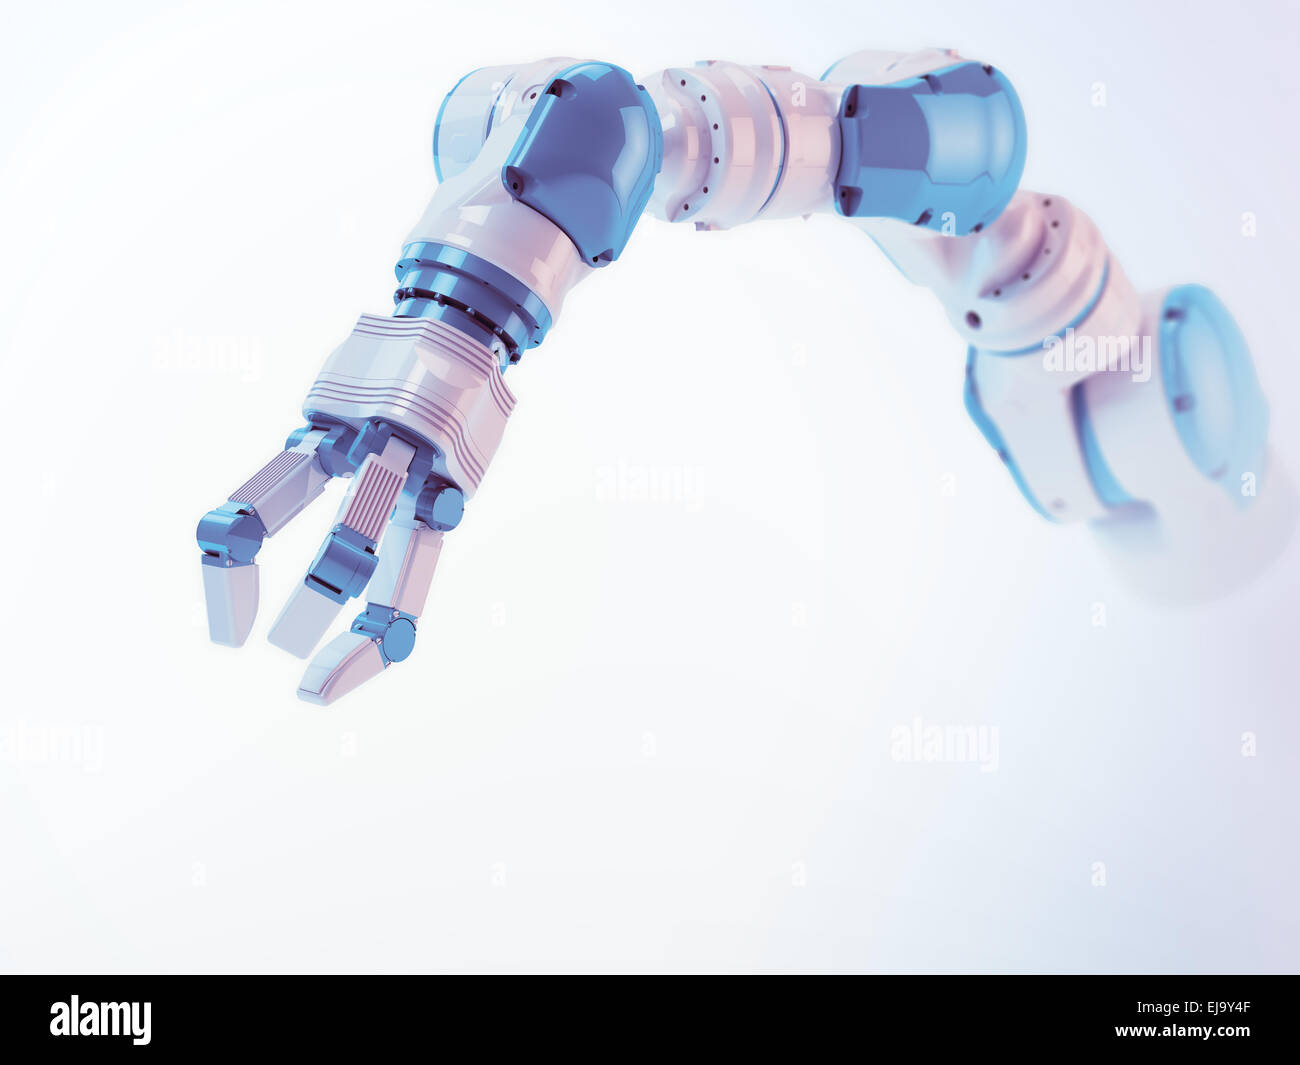 An industrial robot arm on white Stock Photo